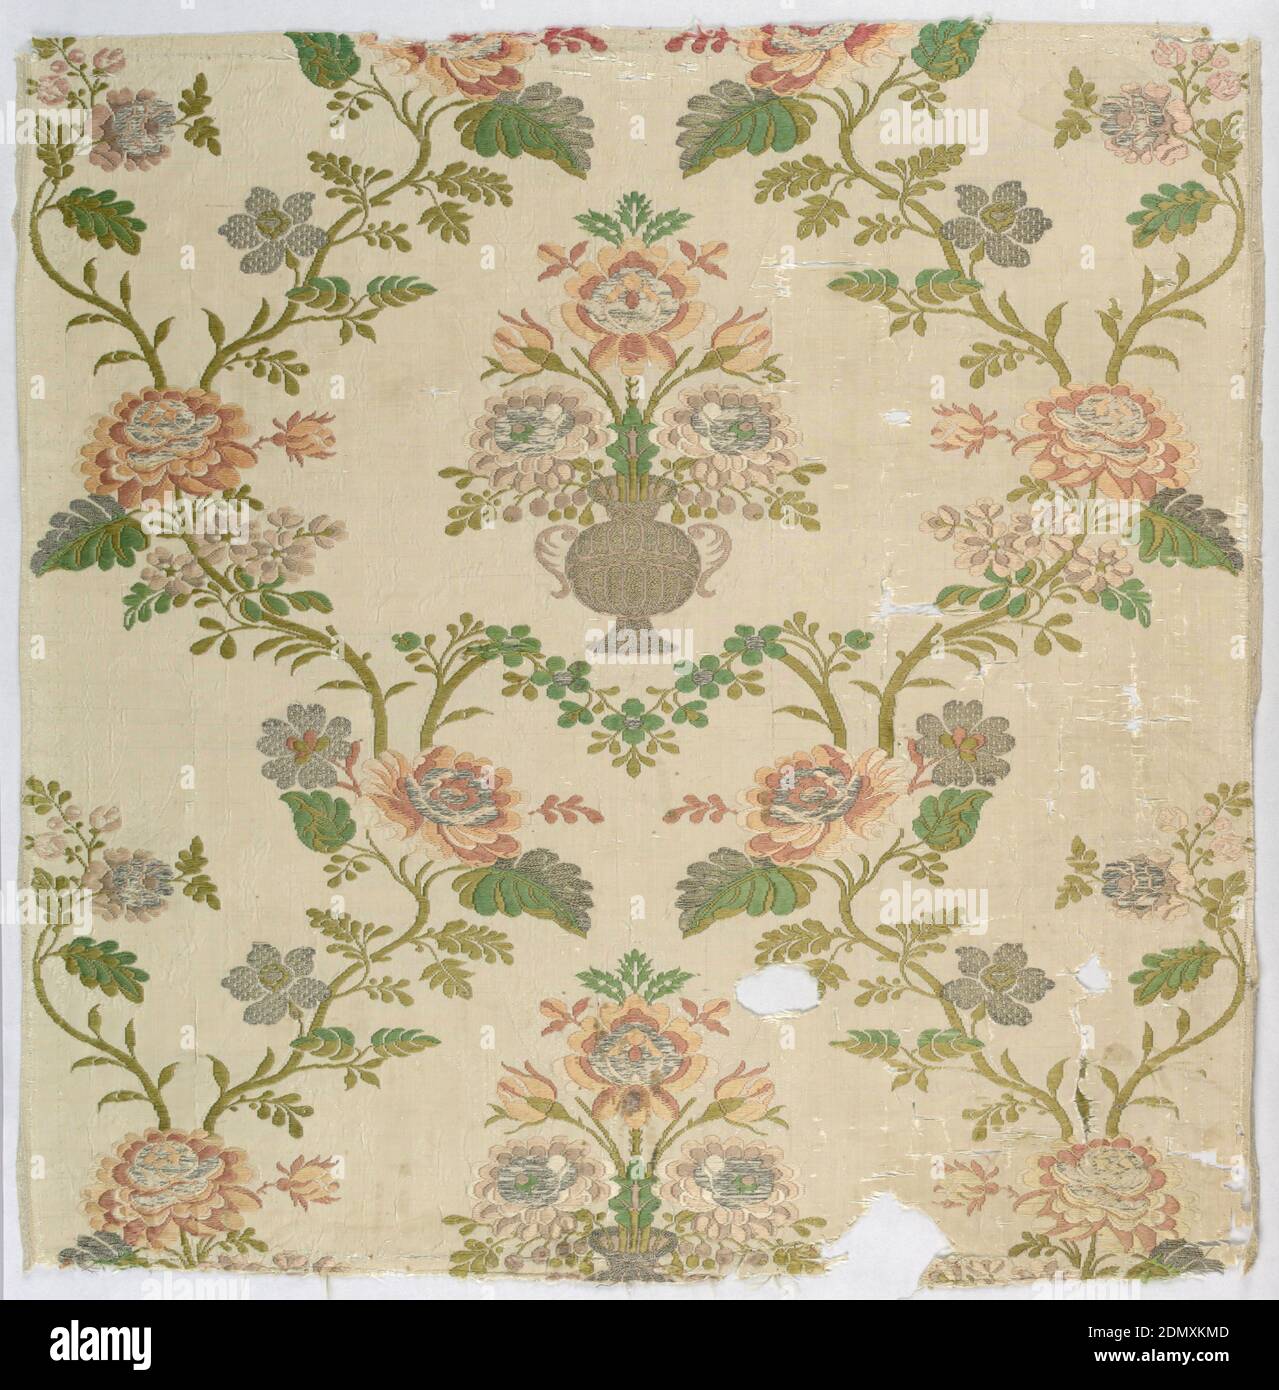 Fragment, Medium: silk Technique: plain weave with discontinuous suypplementary wefts (brocading)., Symmetrical design of curving vines with flowering urn in the center., ca. 1750, woven textiles, Fragment Stock Photo